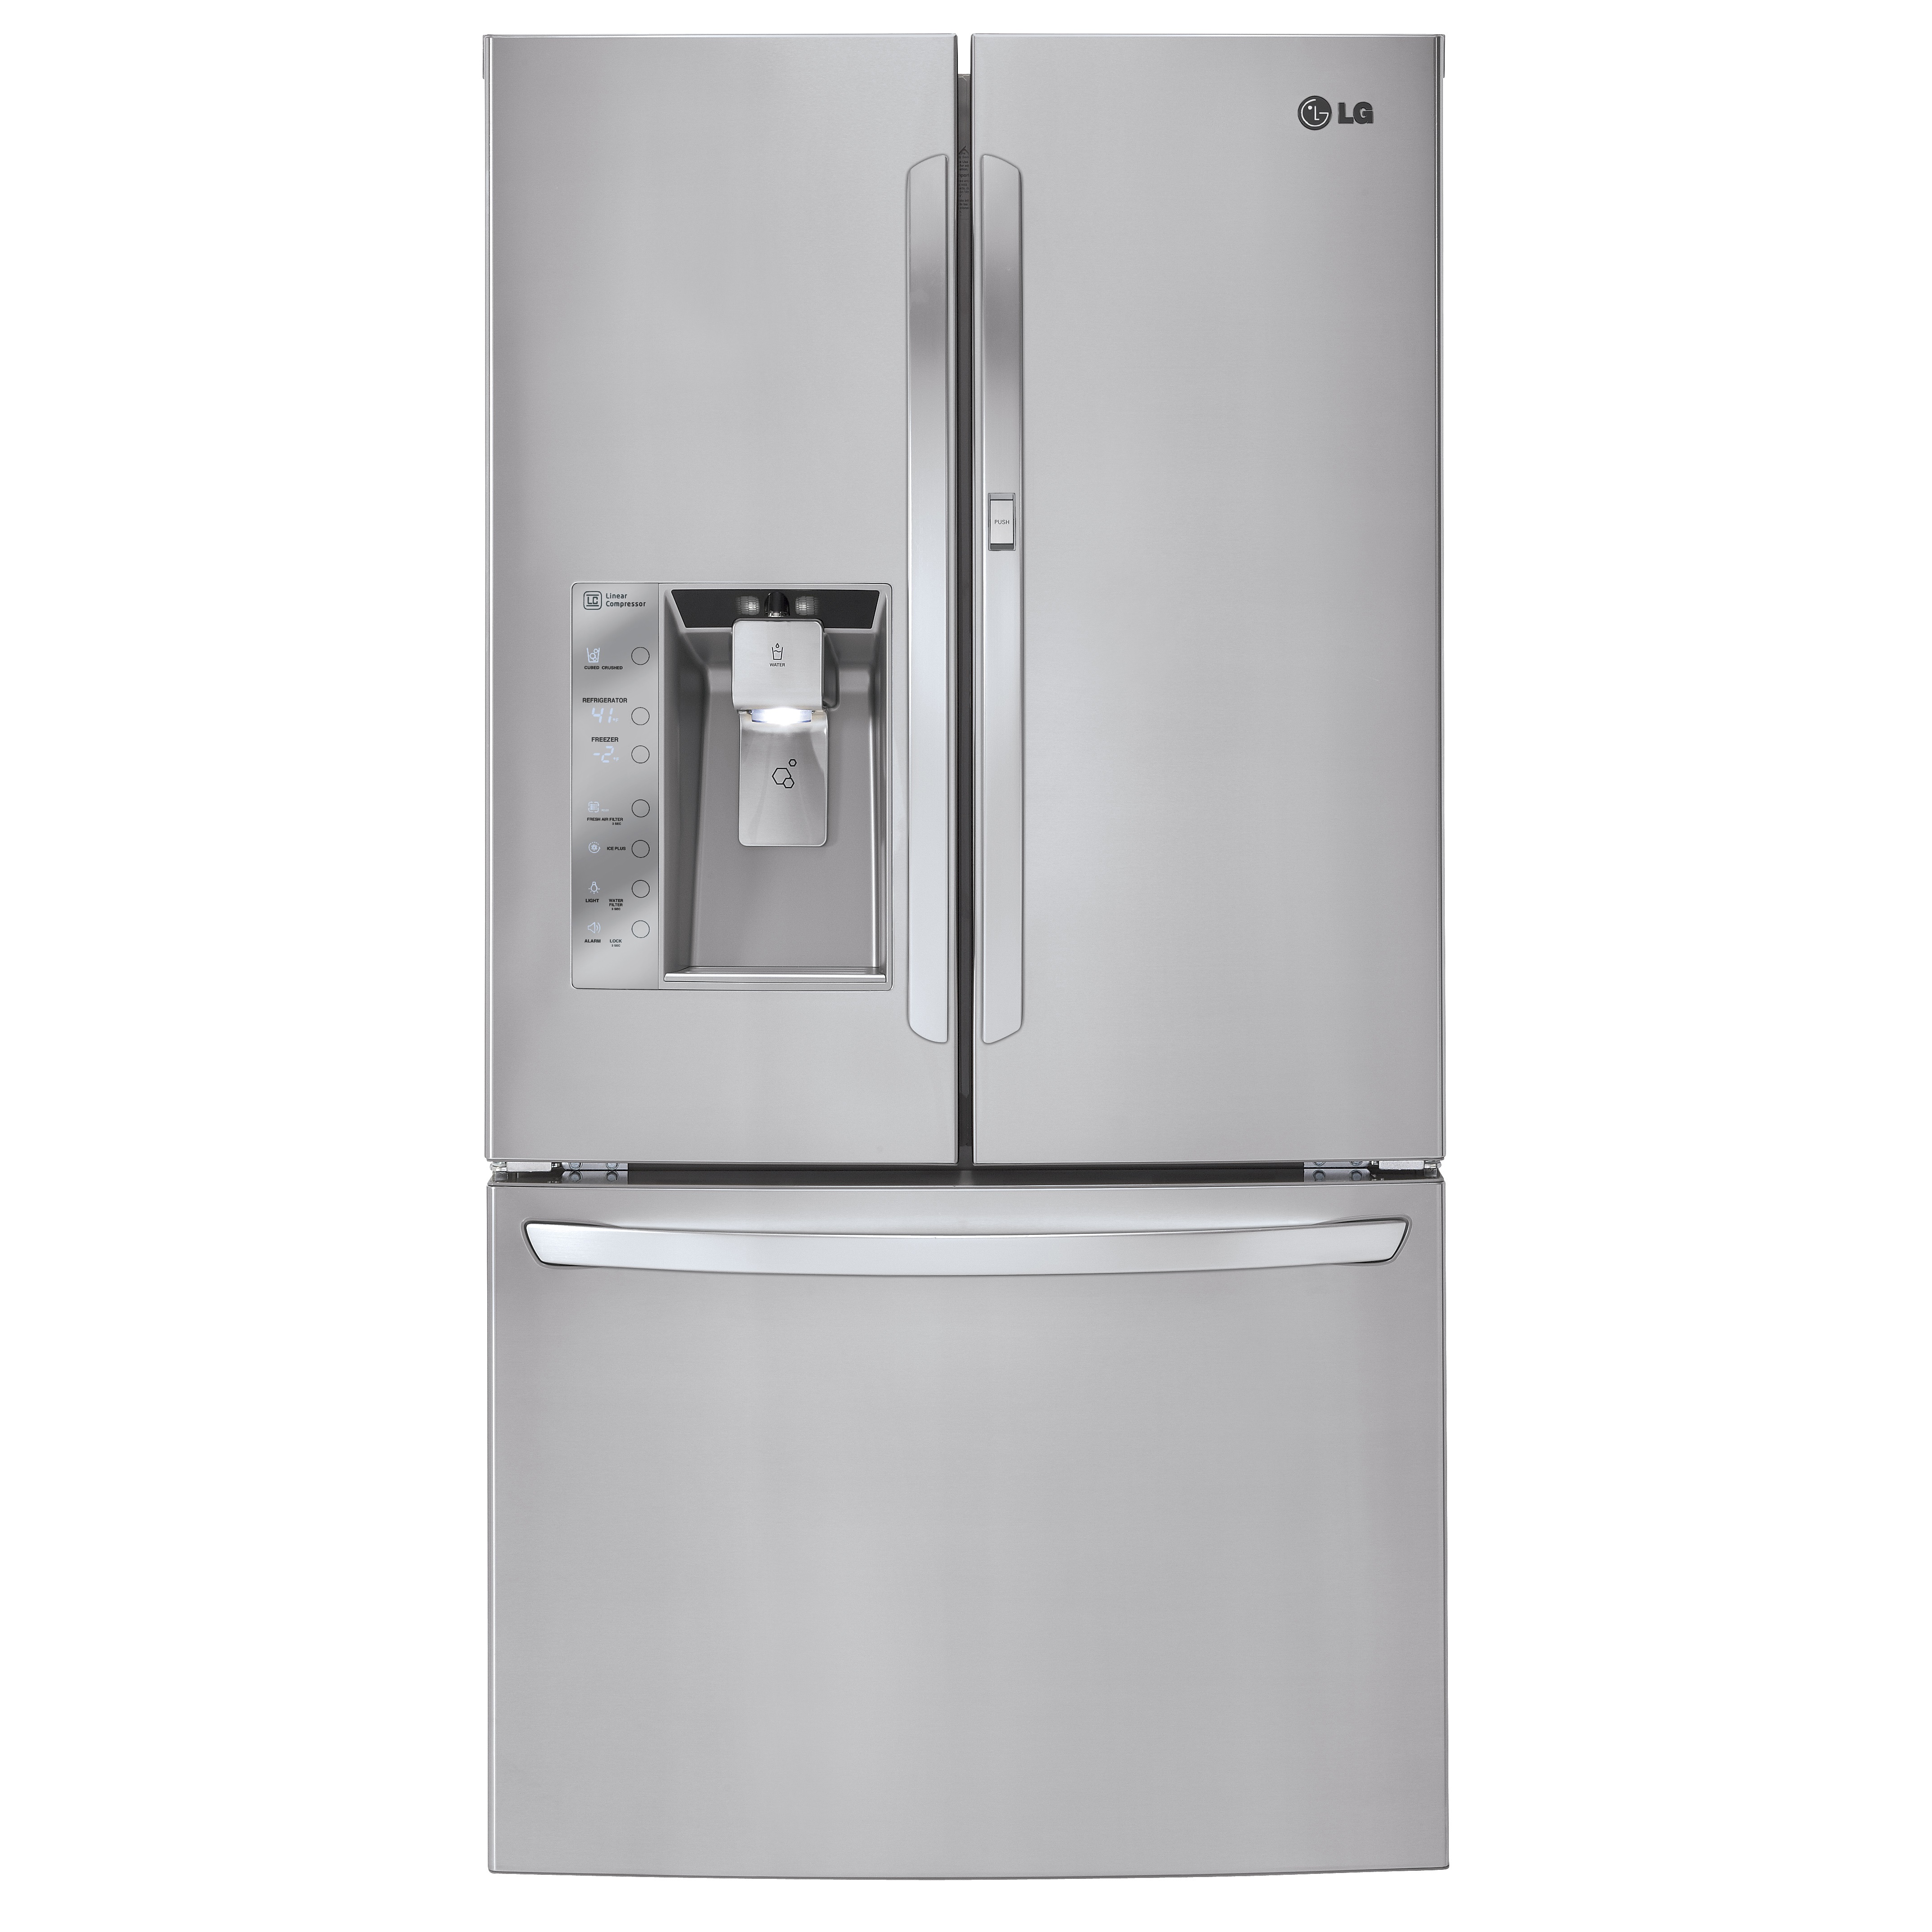 lg-s-newest-refrigerators-expected-to-turn-heads-at-ces-2014-lg-newsroom